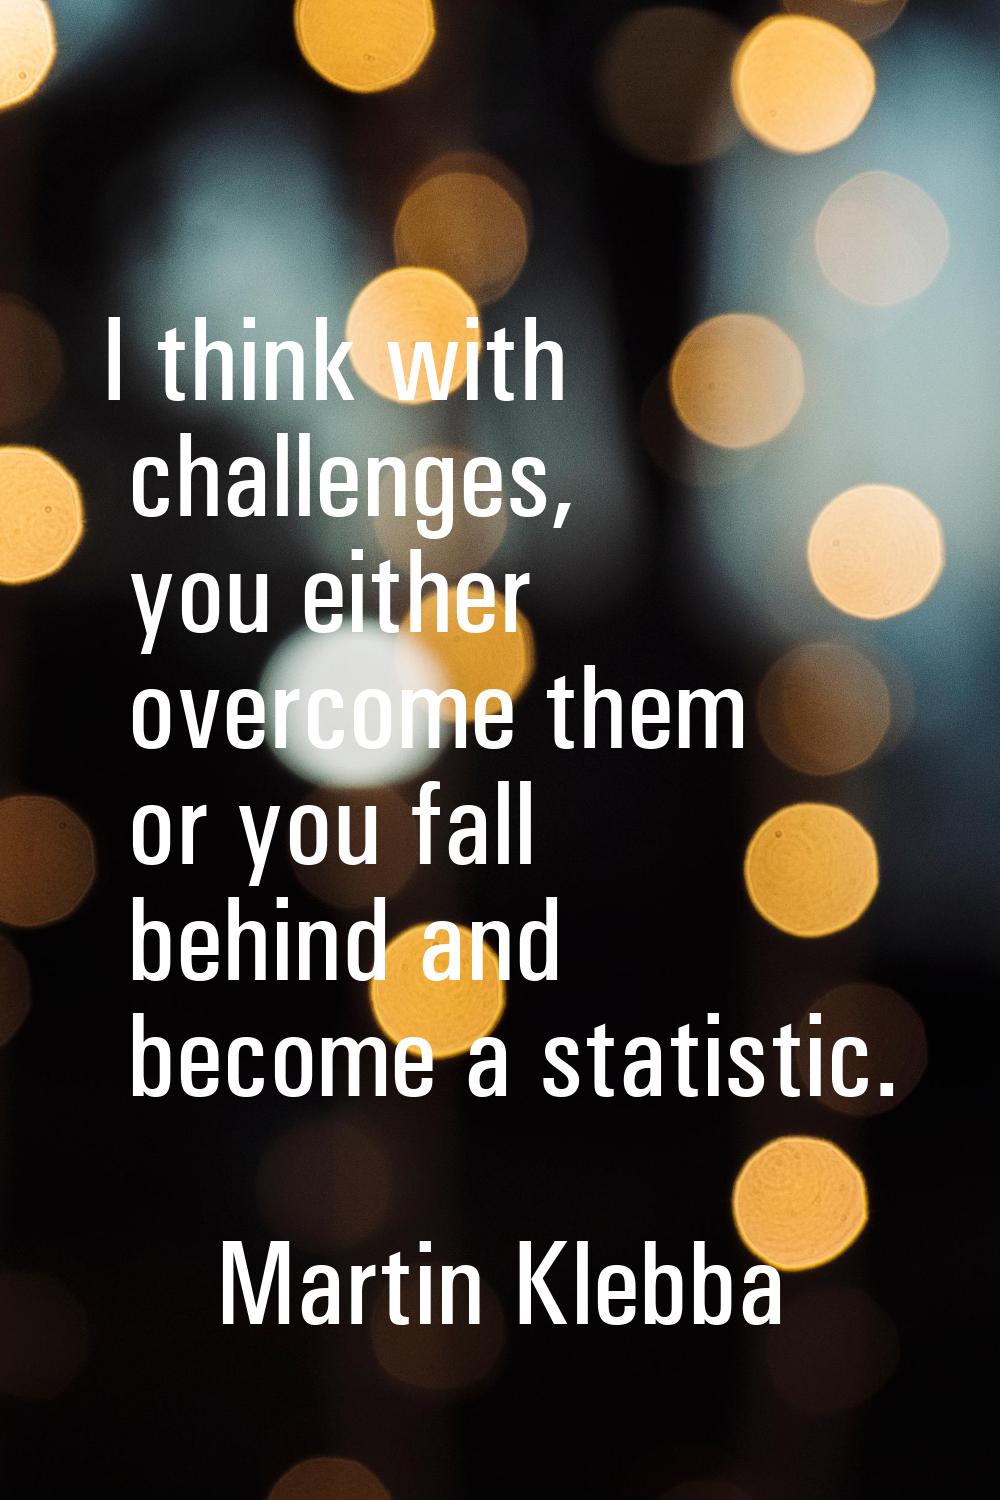 I think with challenges, you either overcome them or you fall behind and become a statistic.